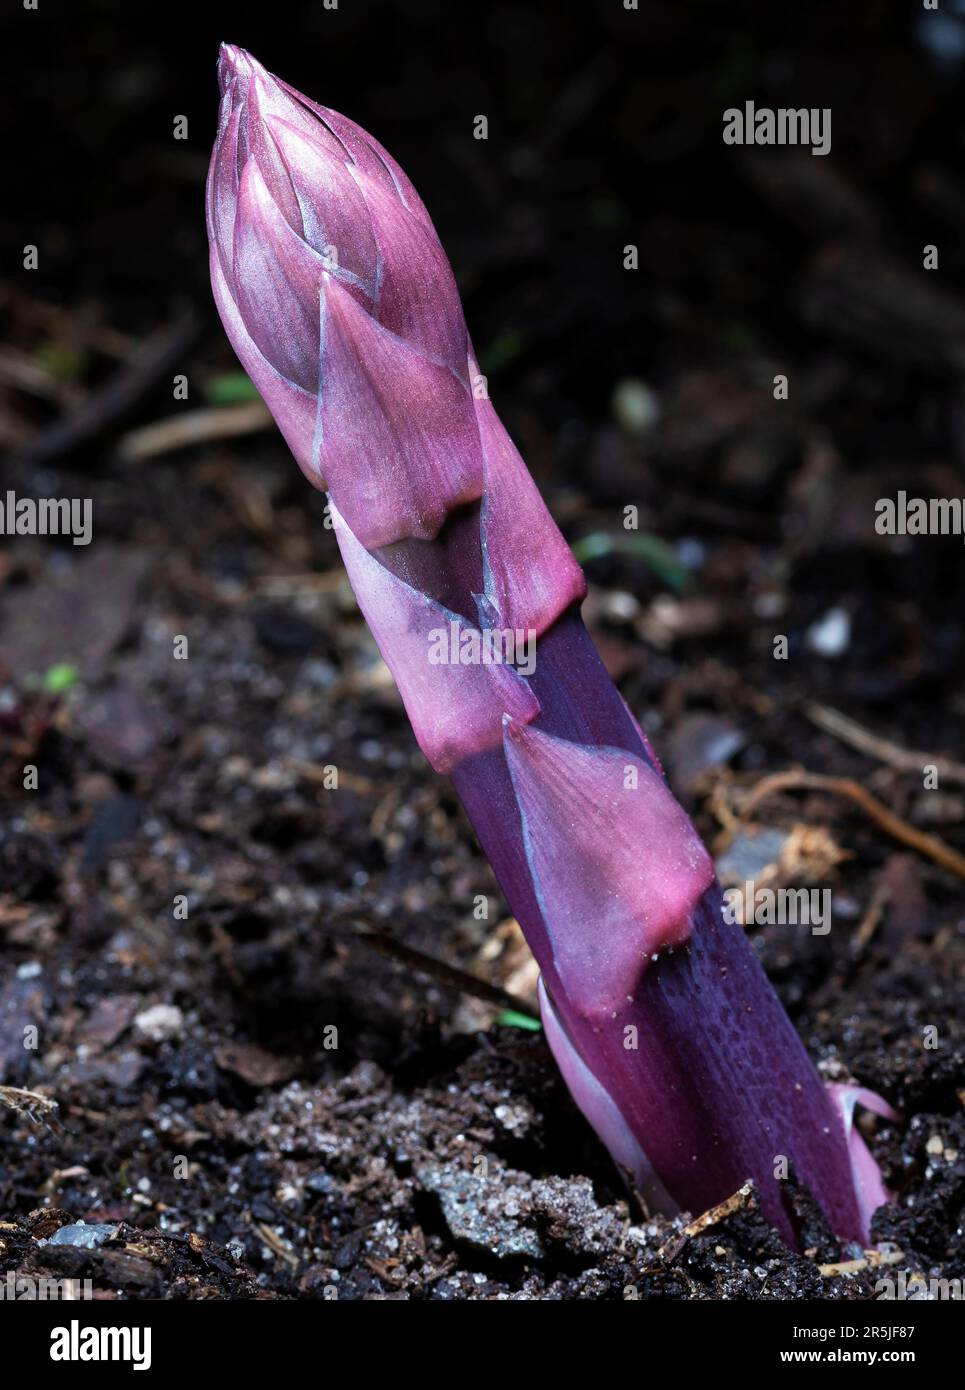 Bright purple passion asparagus sprearing out of garden soil Stock Photo